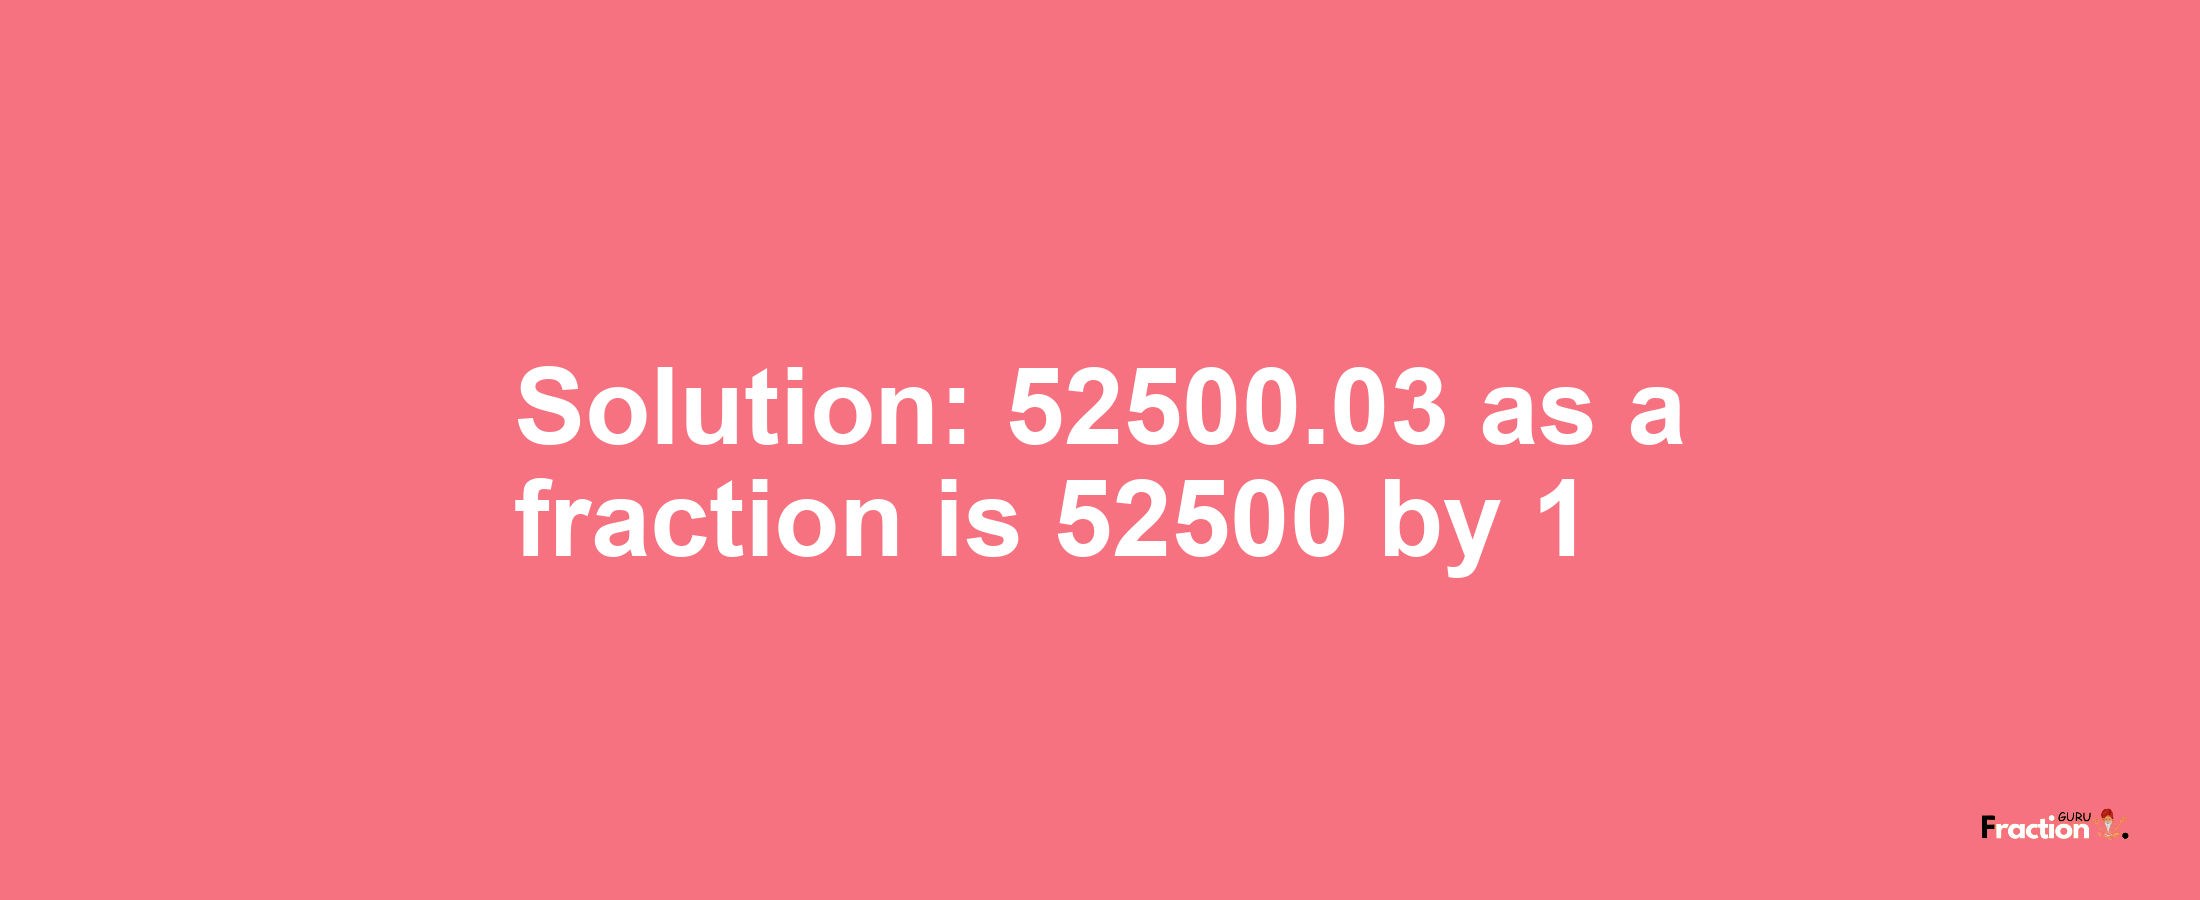 Solution:52500.03 as a fraction is 52500/1